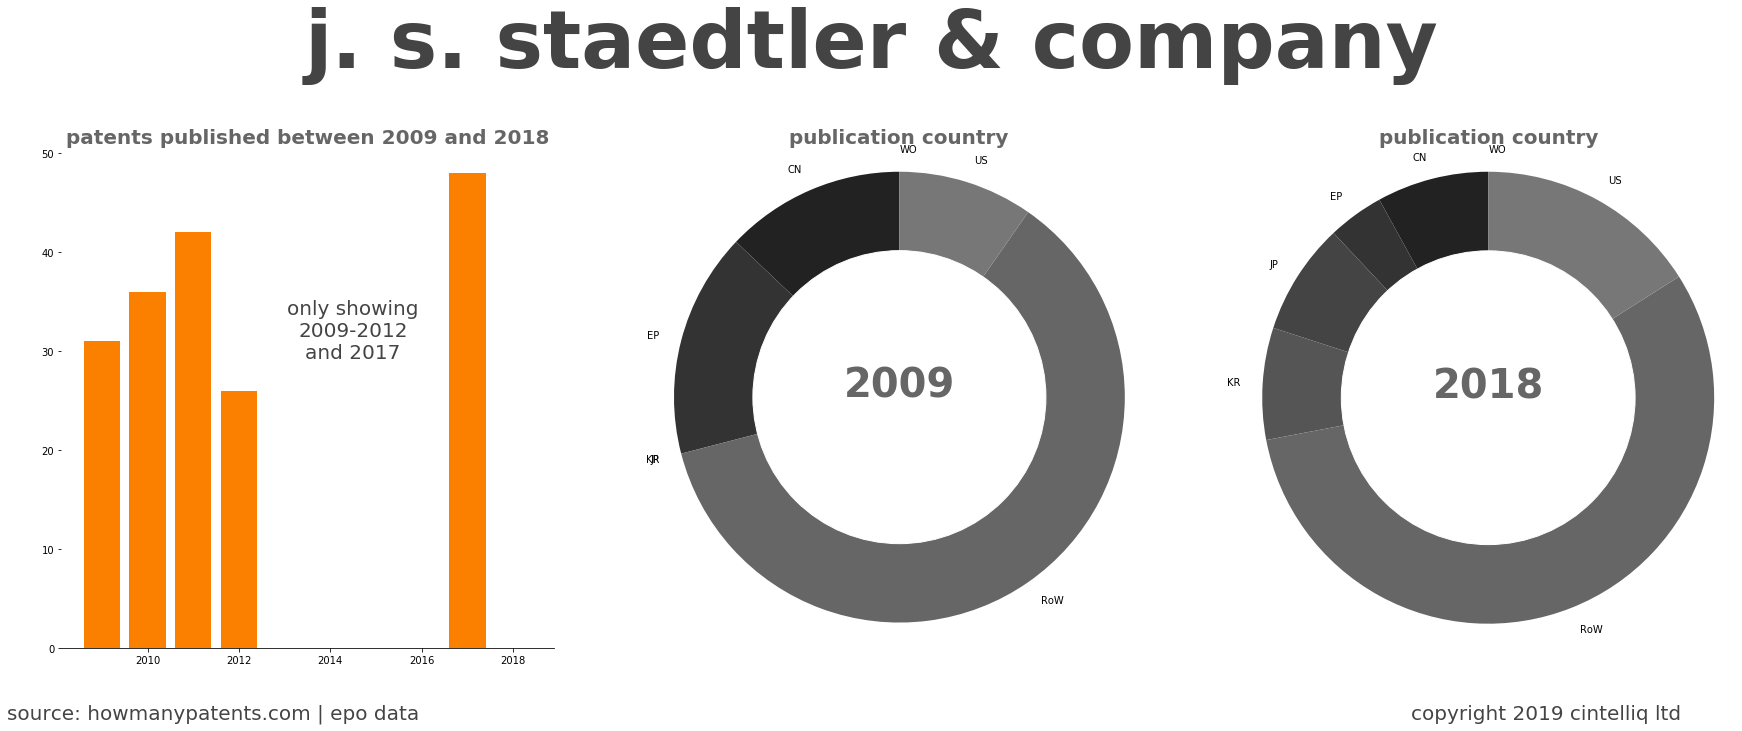 summary of patents for J. S. Staedtler & Company